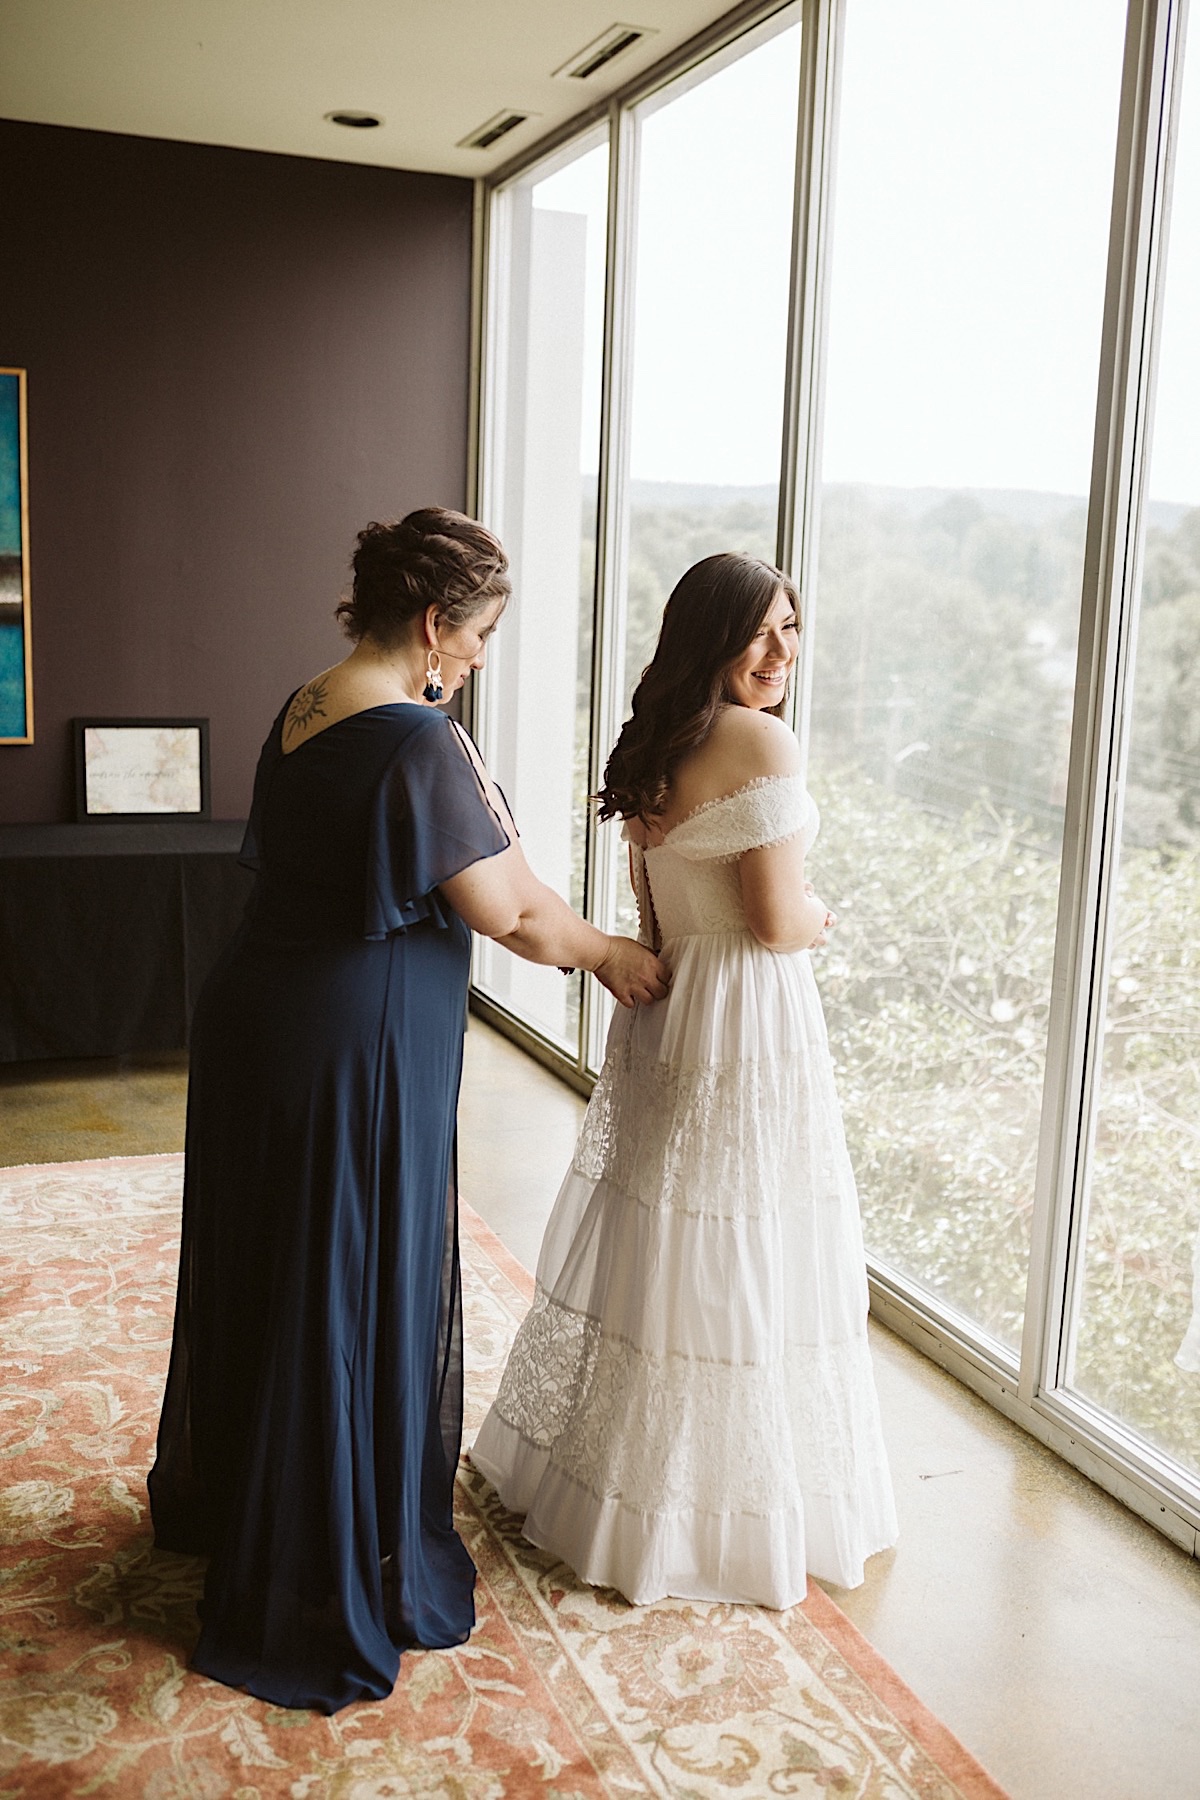 Mother of the bride stands behind her daughter, zipping her lace off-the-shoulder gown. Floor-to-ceiling windows frame them.